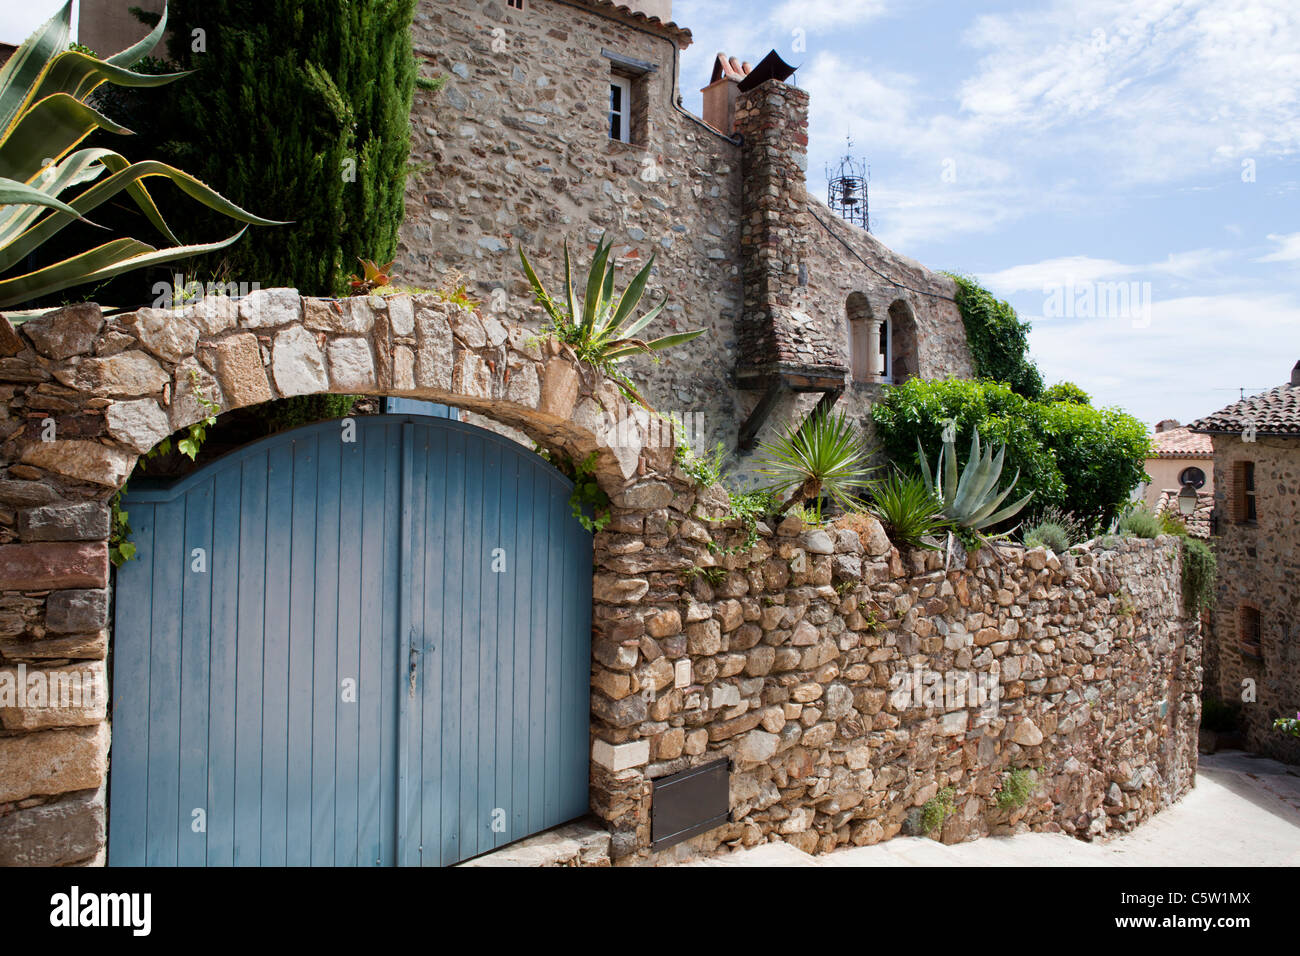 Grimaud, Var Cote d'Azur, France. Old village renewed property  keeping the traditional characteristics Stock Photo